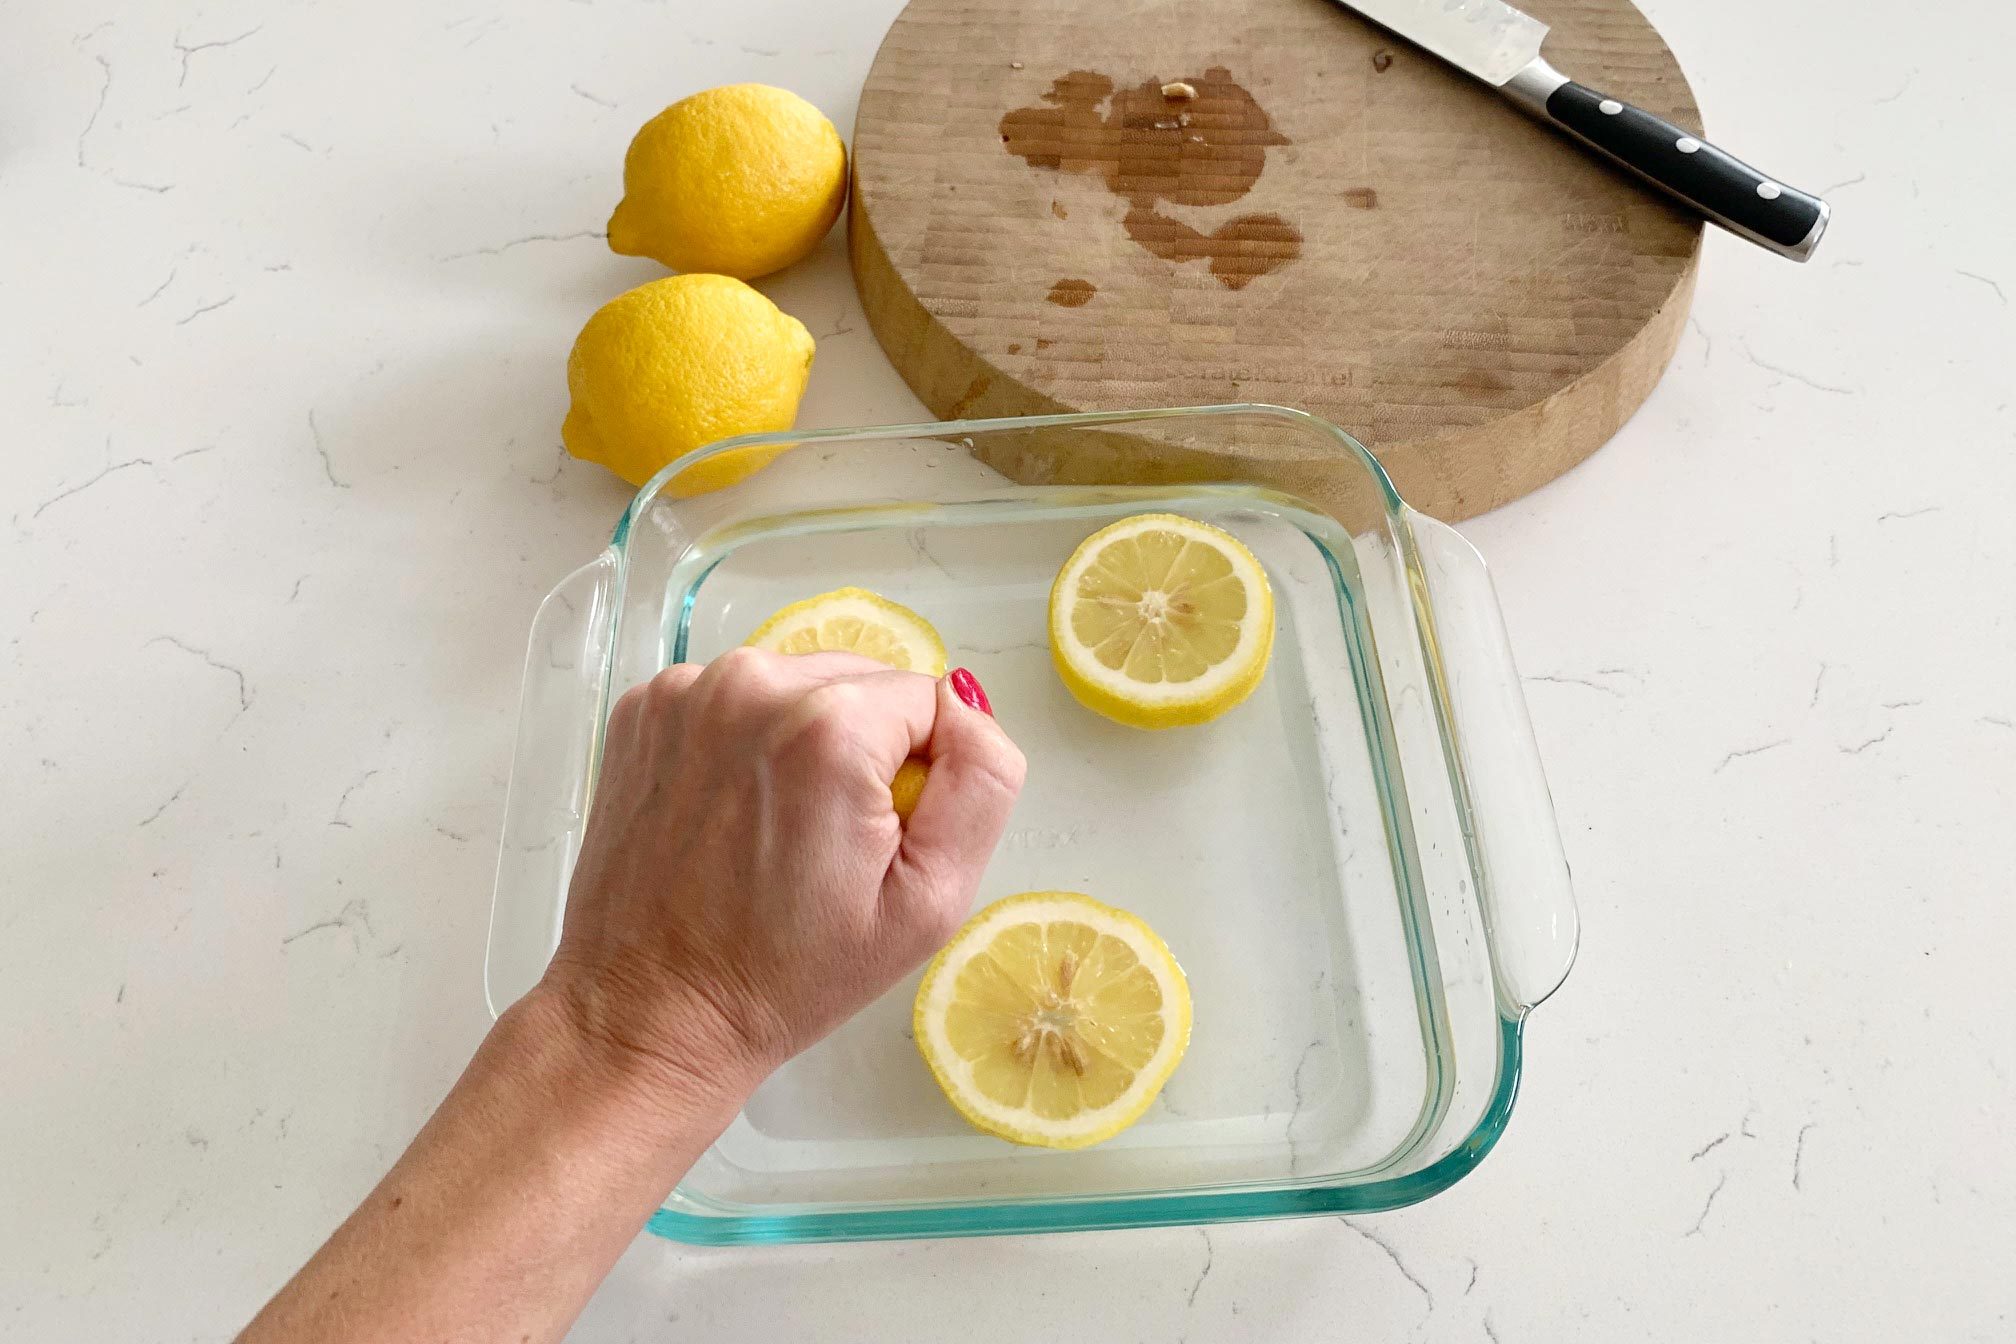 squeezing lemons into a dish